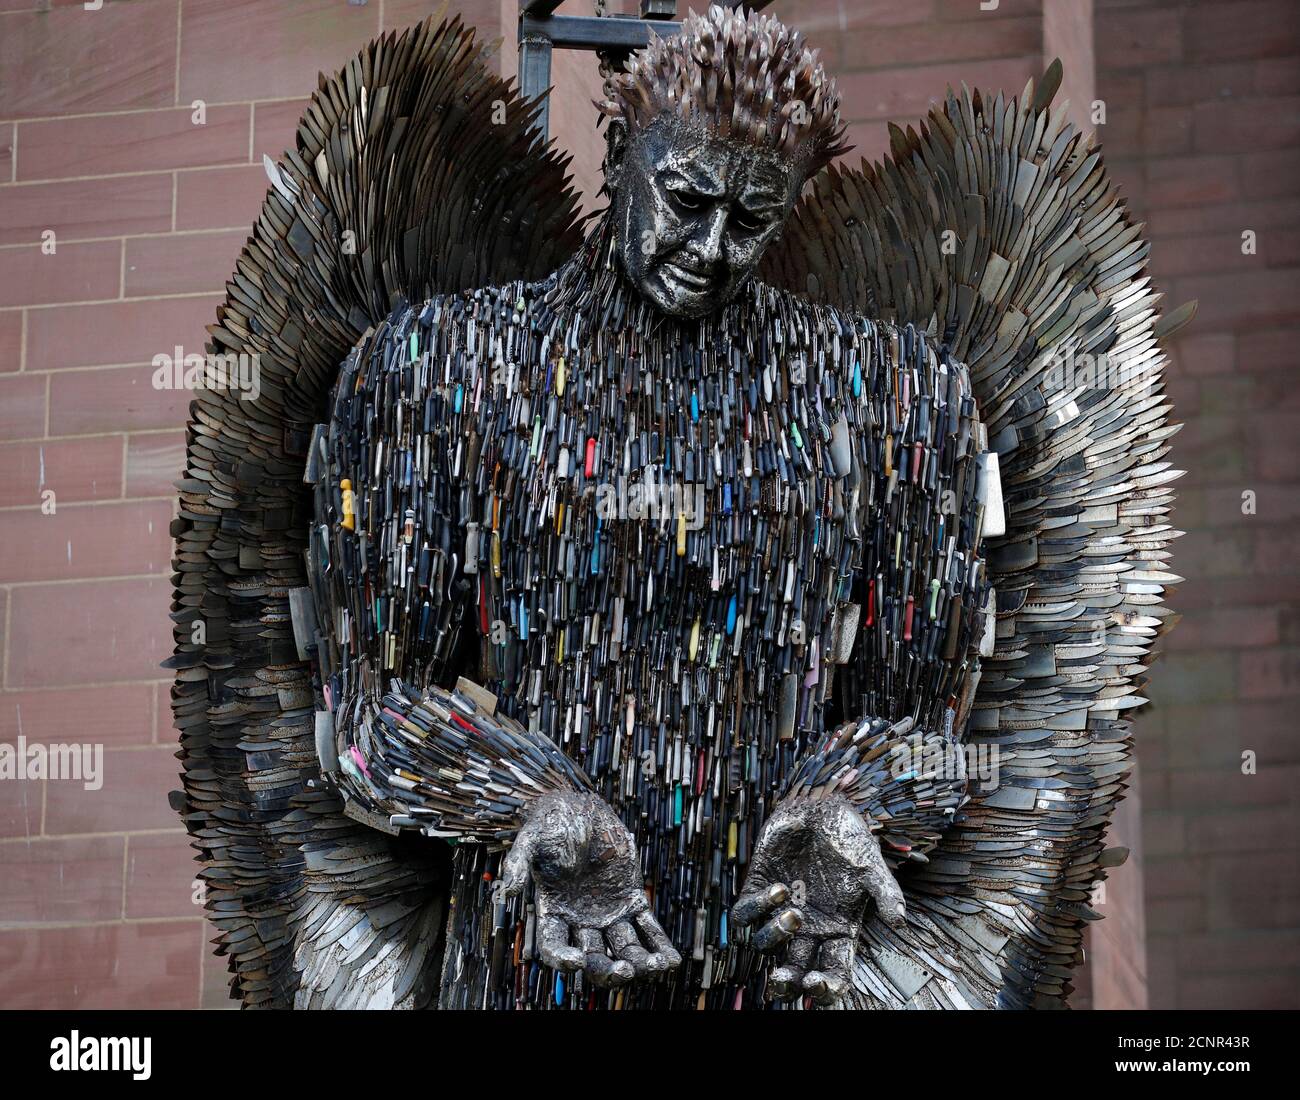 The 'Angel of Knives' sculpture by artist Alfie Bradley, made from over 100,000 confiscated knives, goes on display outside the Anglican Cathedral, in Liverpool, Britain, November 29, 2018. REUTERS/Phil Noble Stock Photo